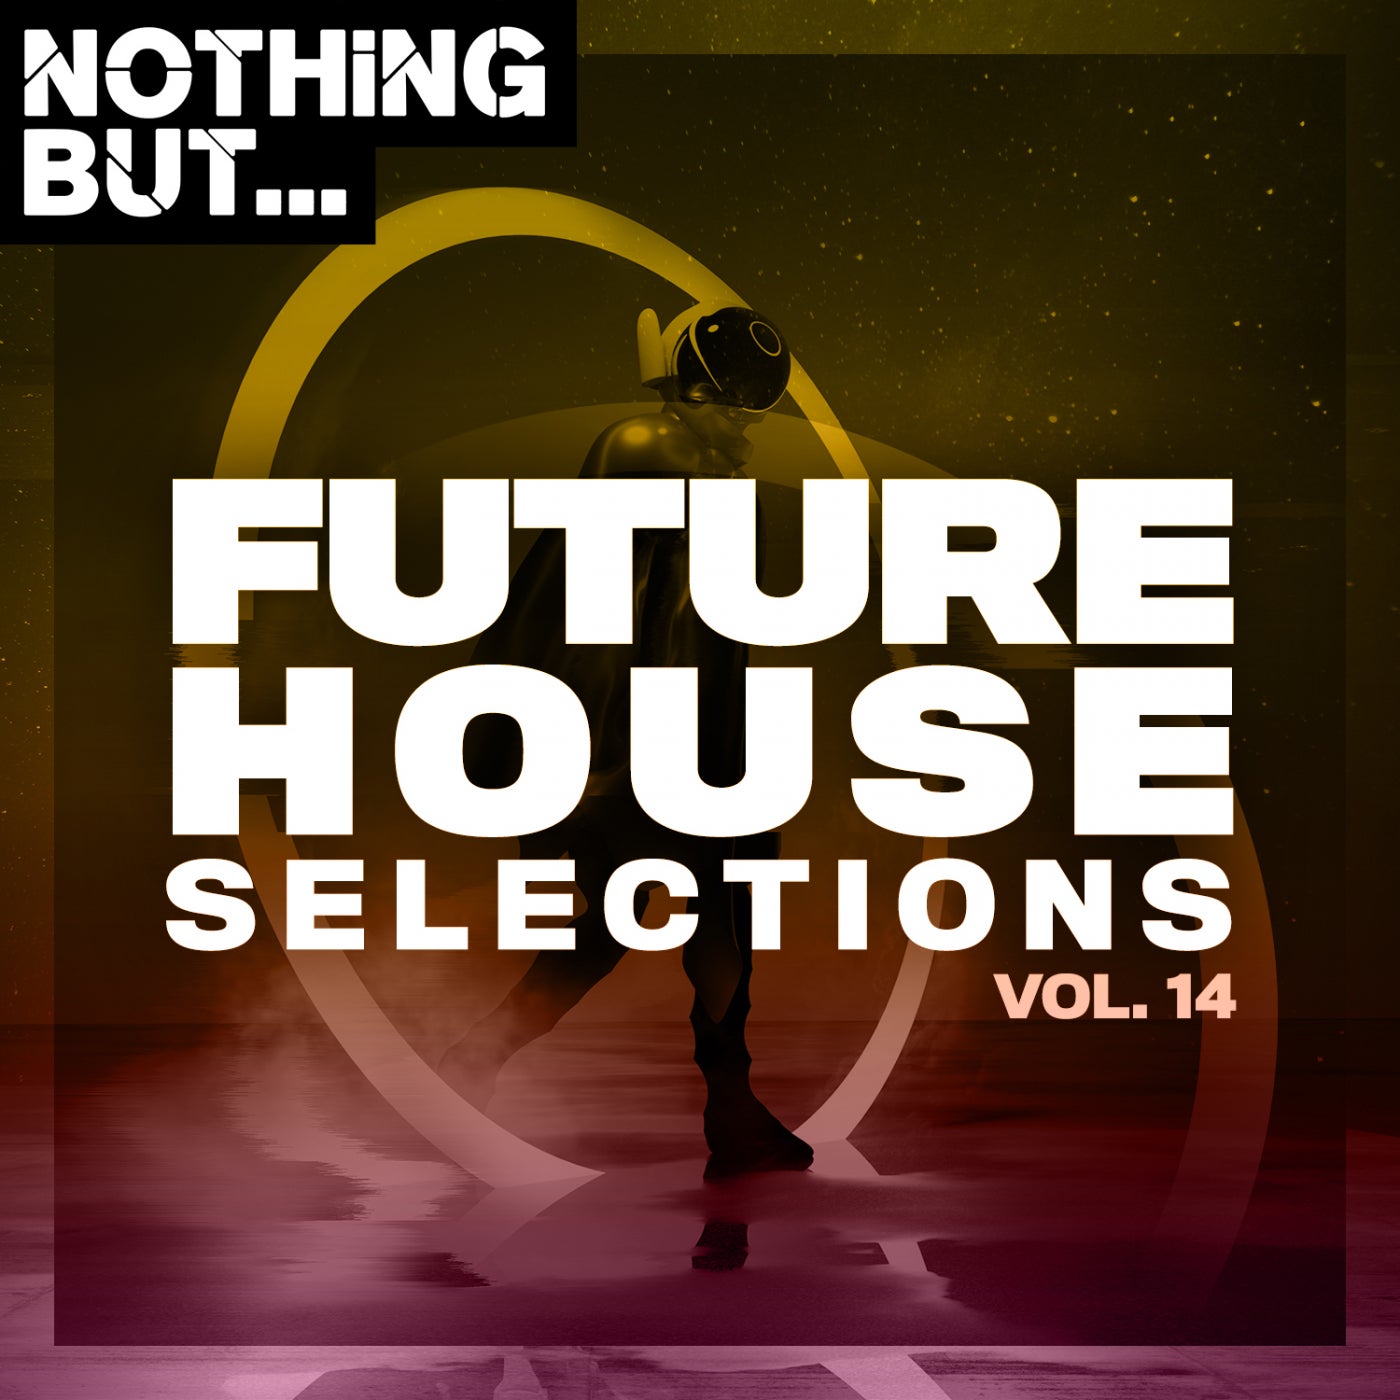 VA – Nothing But… Future House Selections, Vol. 14 [NBFHS14]